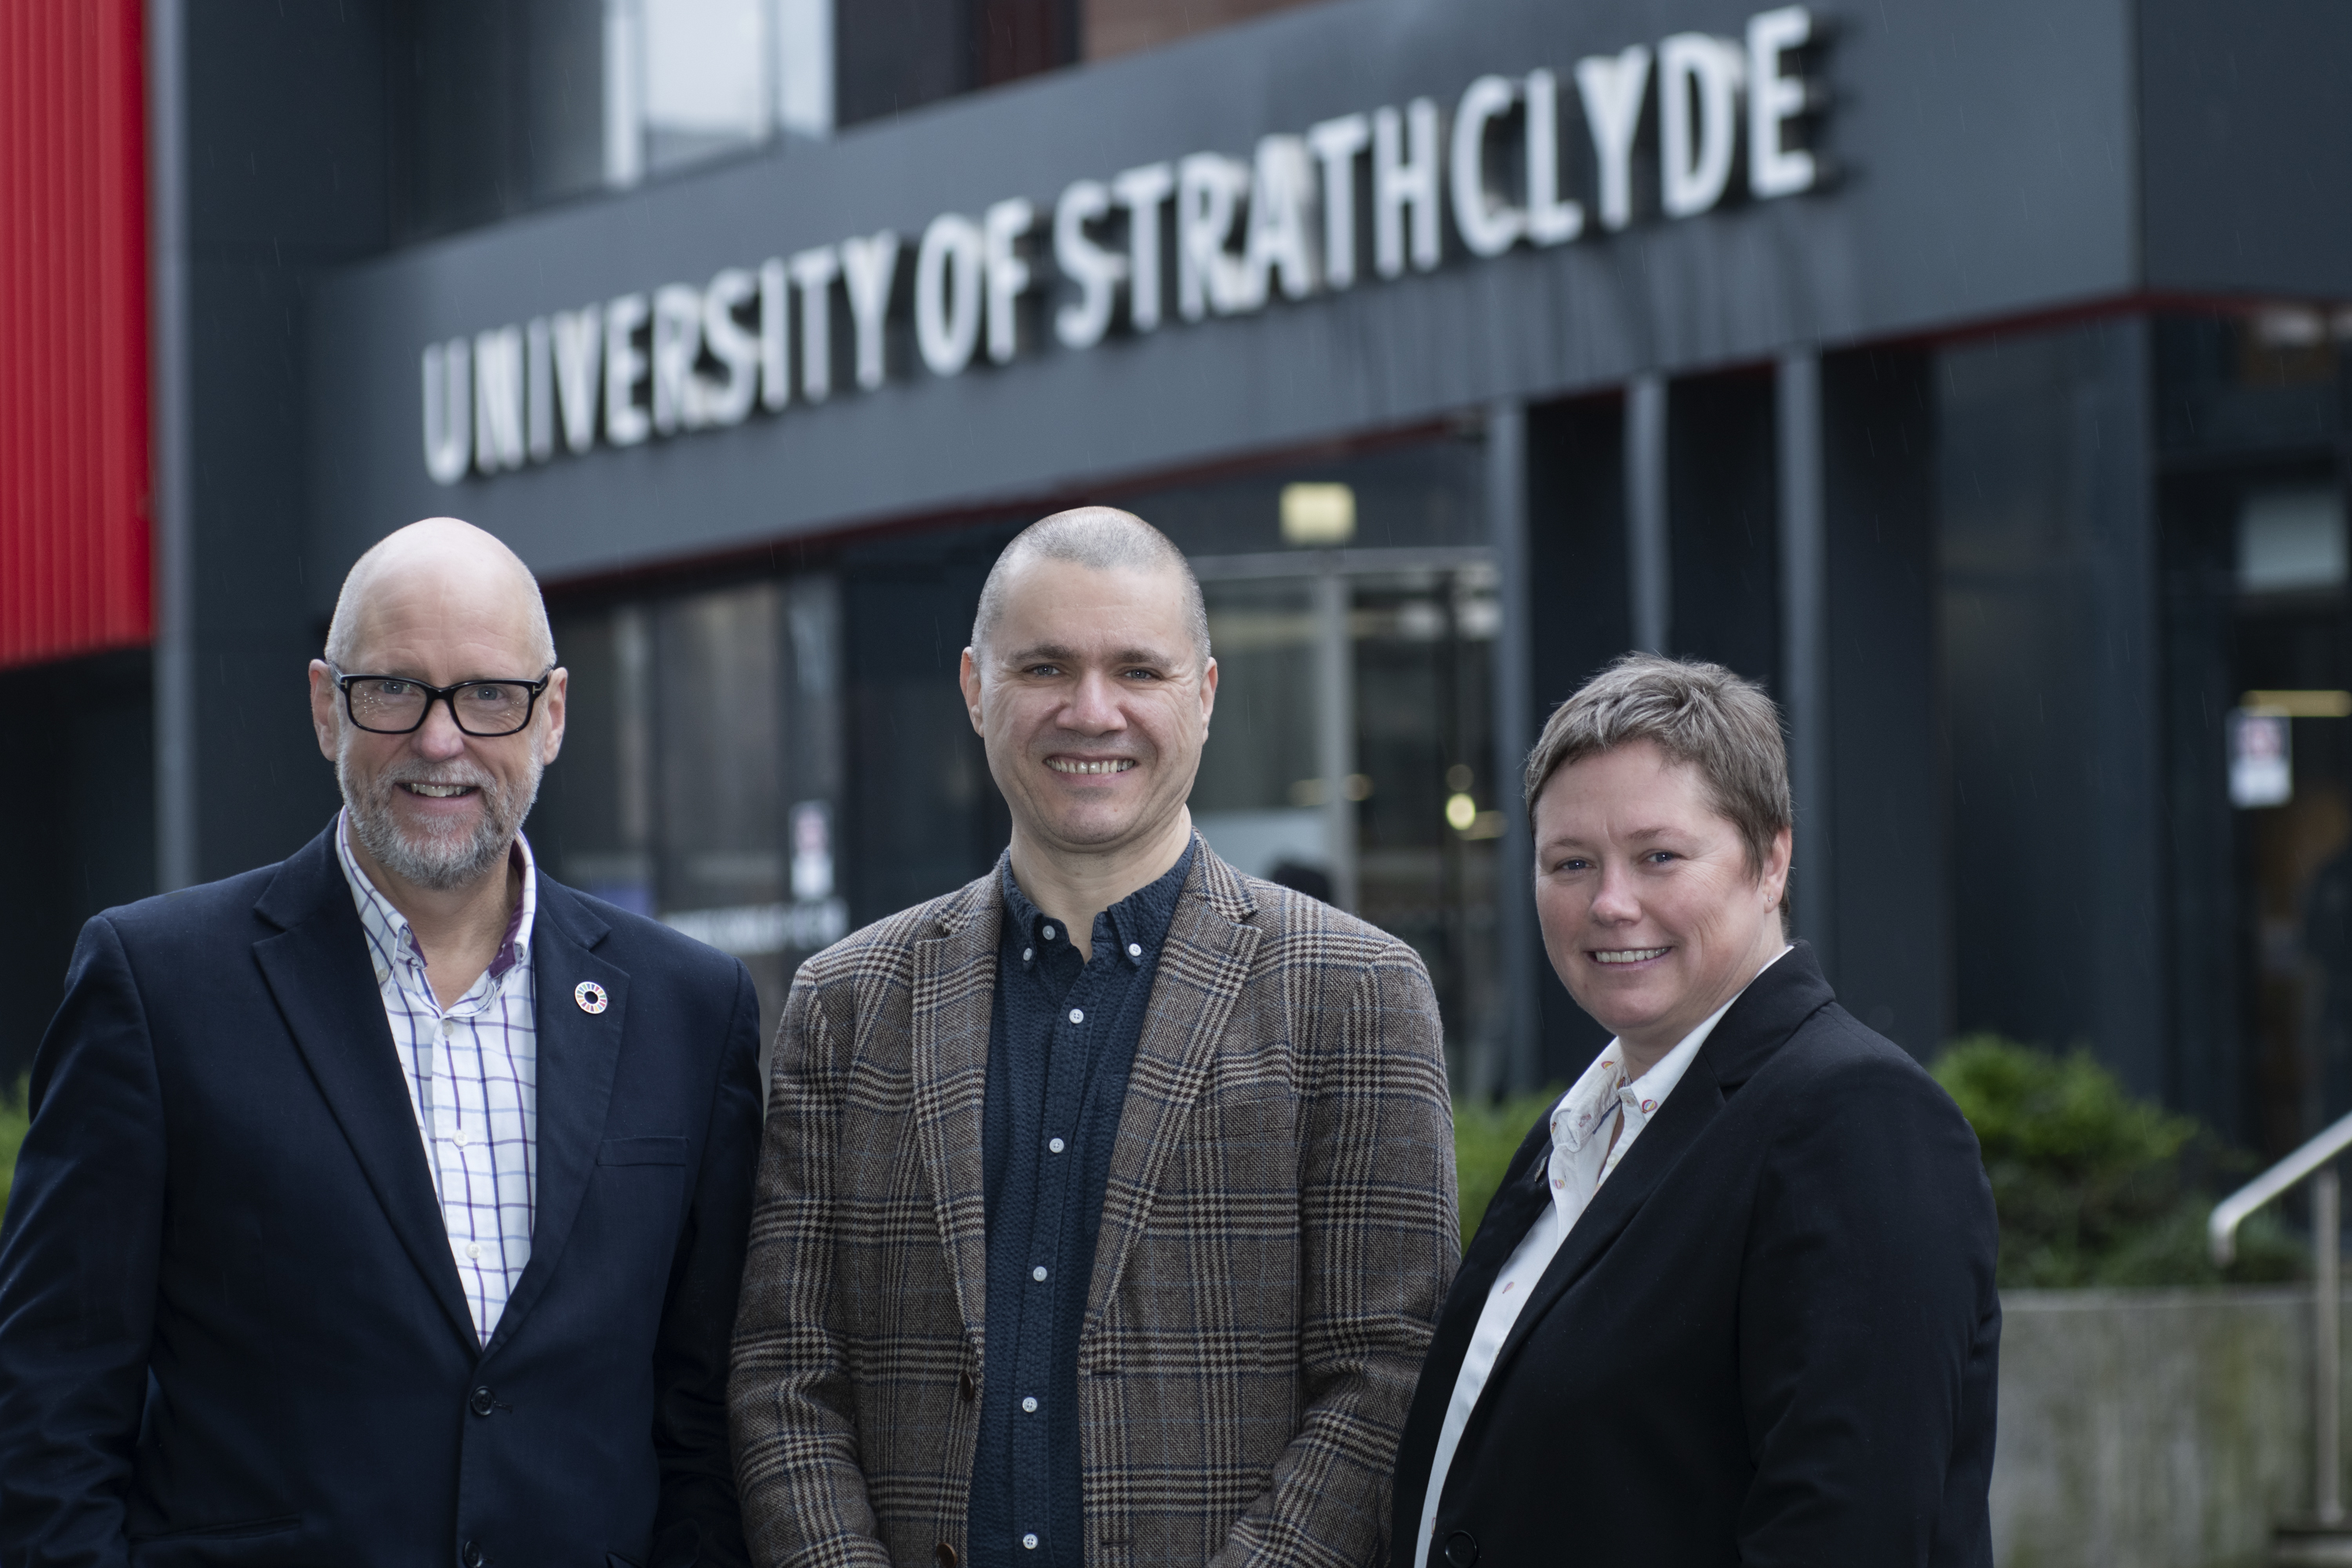 John Anderson, David Ritchie and Gillian Docherty are standing in front of Universty of Strathclyde building.